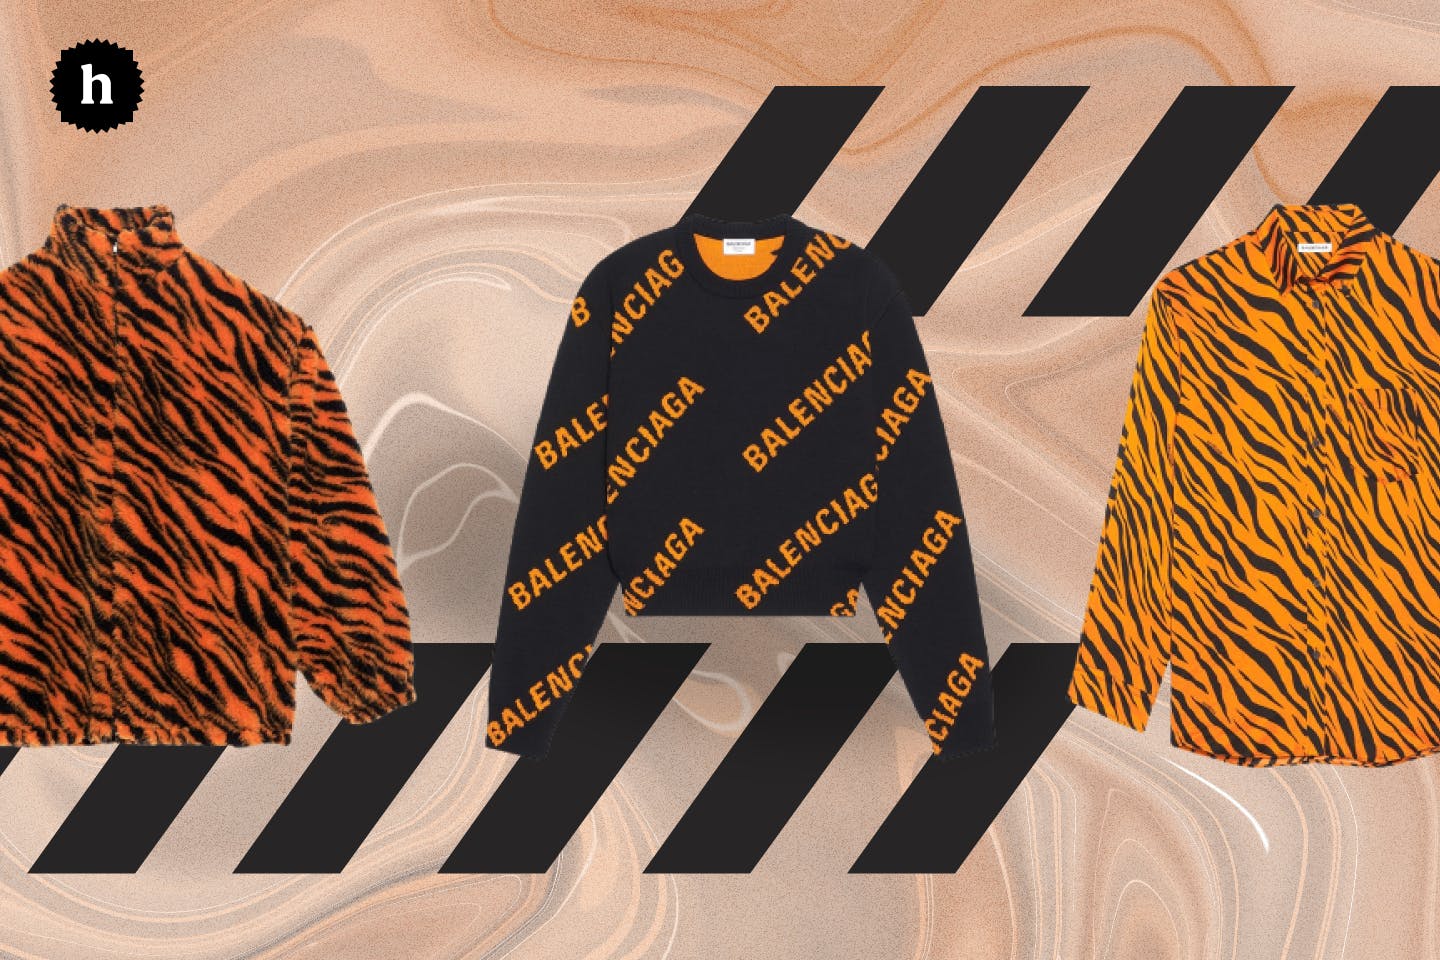 Balenciaga Celebrates the Year of the Tiger with a New Collection 